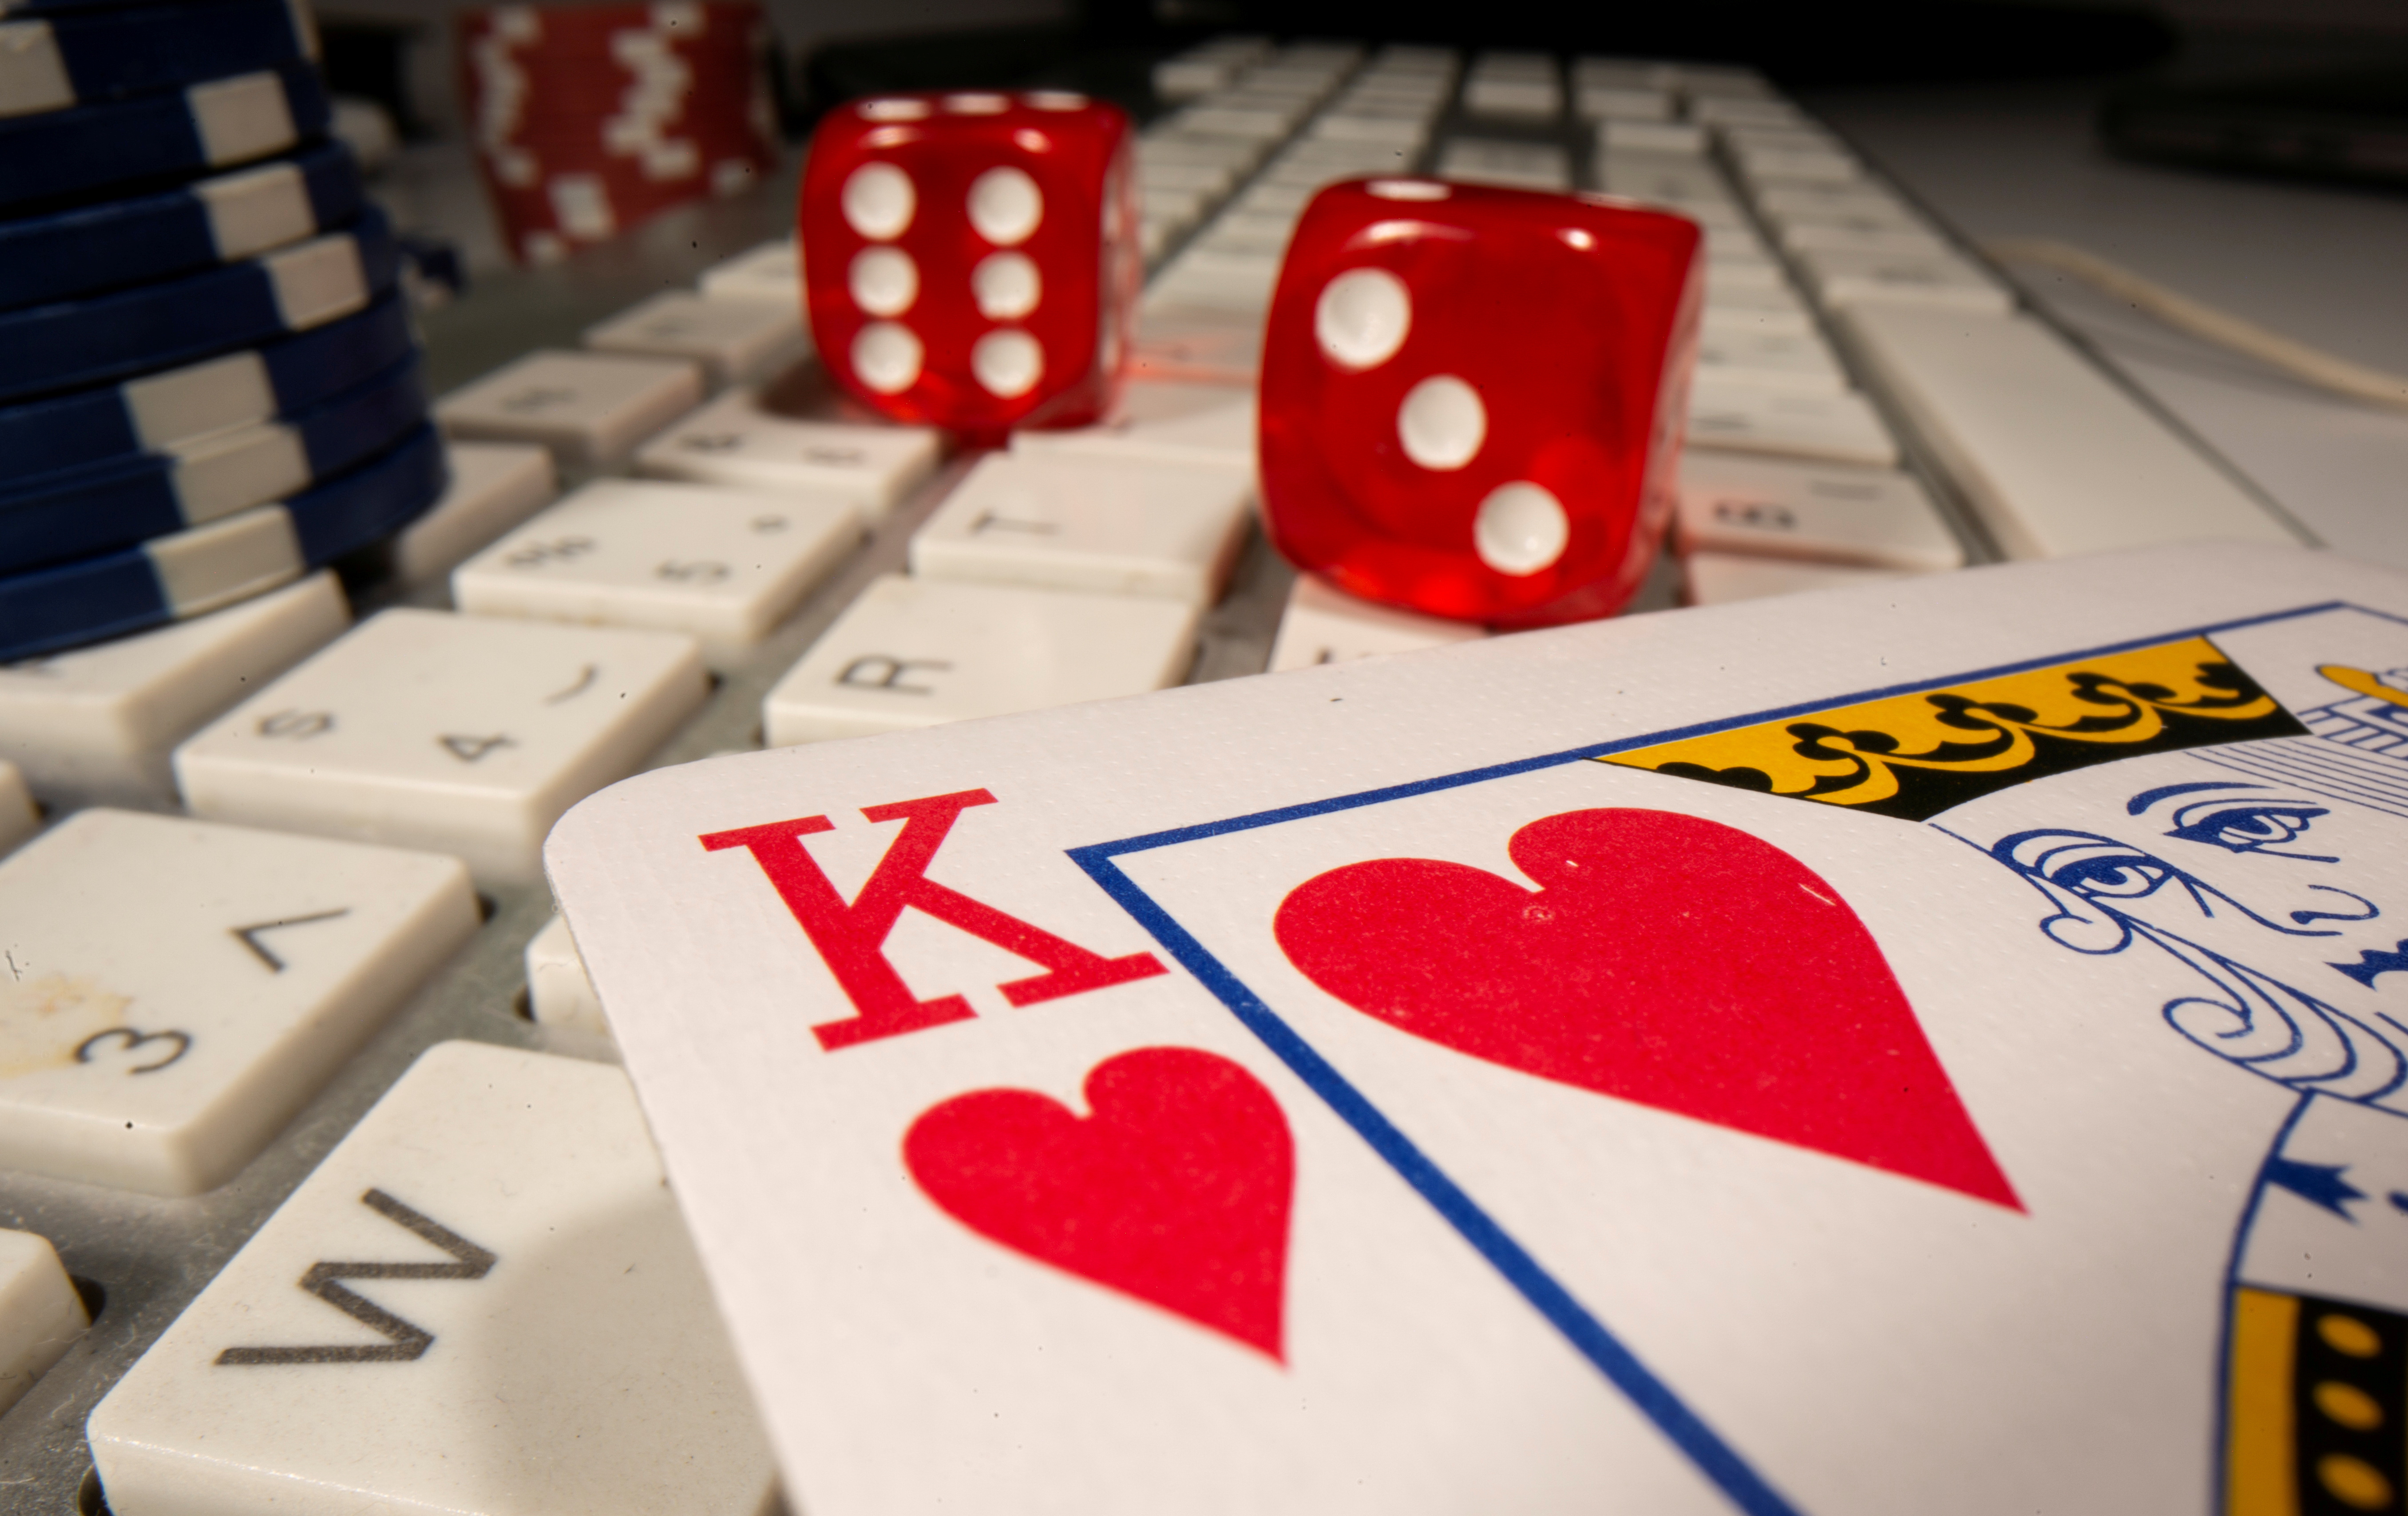 Gambling dice, cards and chips are seen on the keyboard in this illustration picture